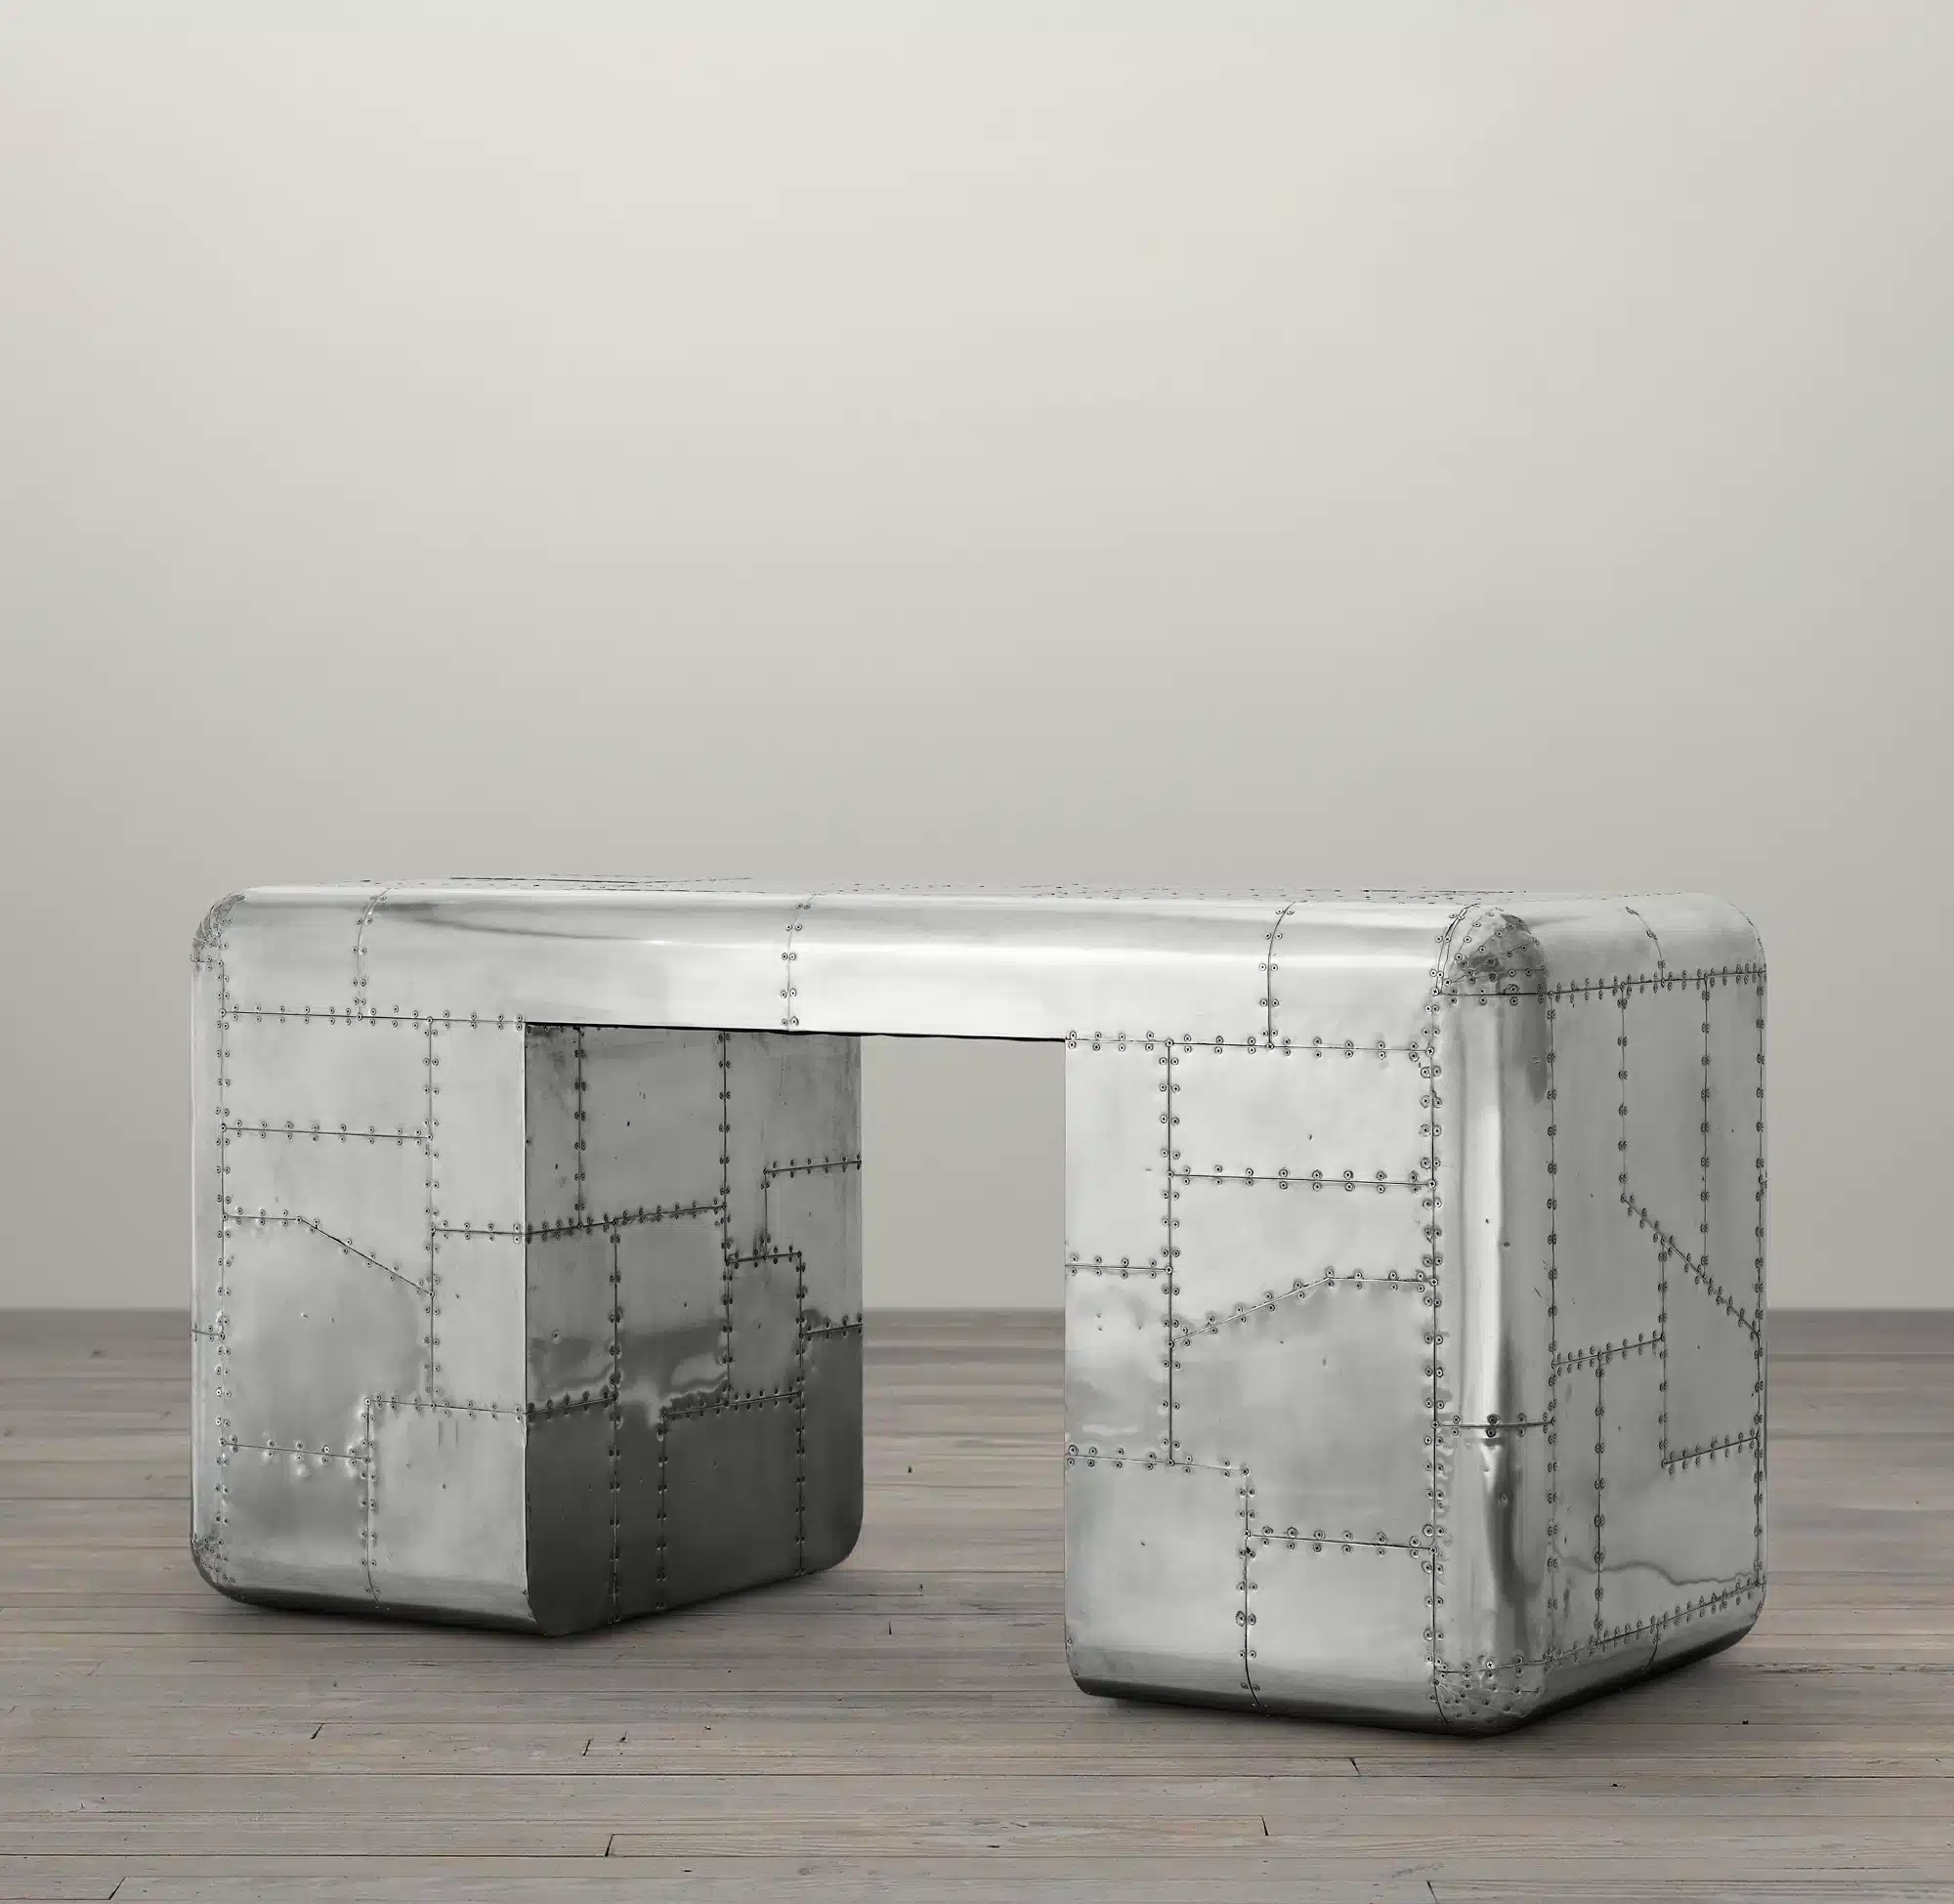 An aluminium Aviator desk inspired by two different military aircraft, melded together in one cool design.